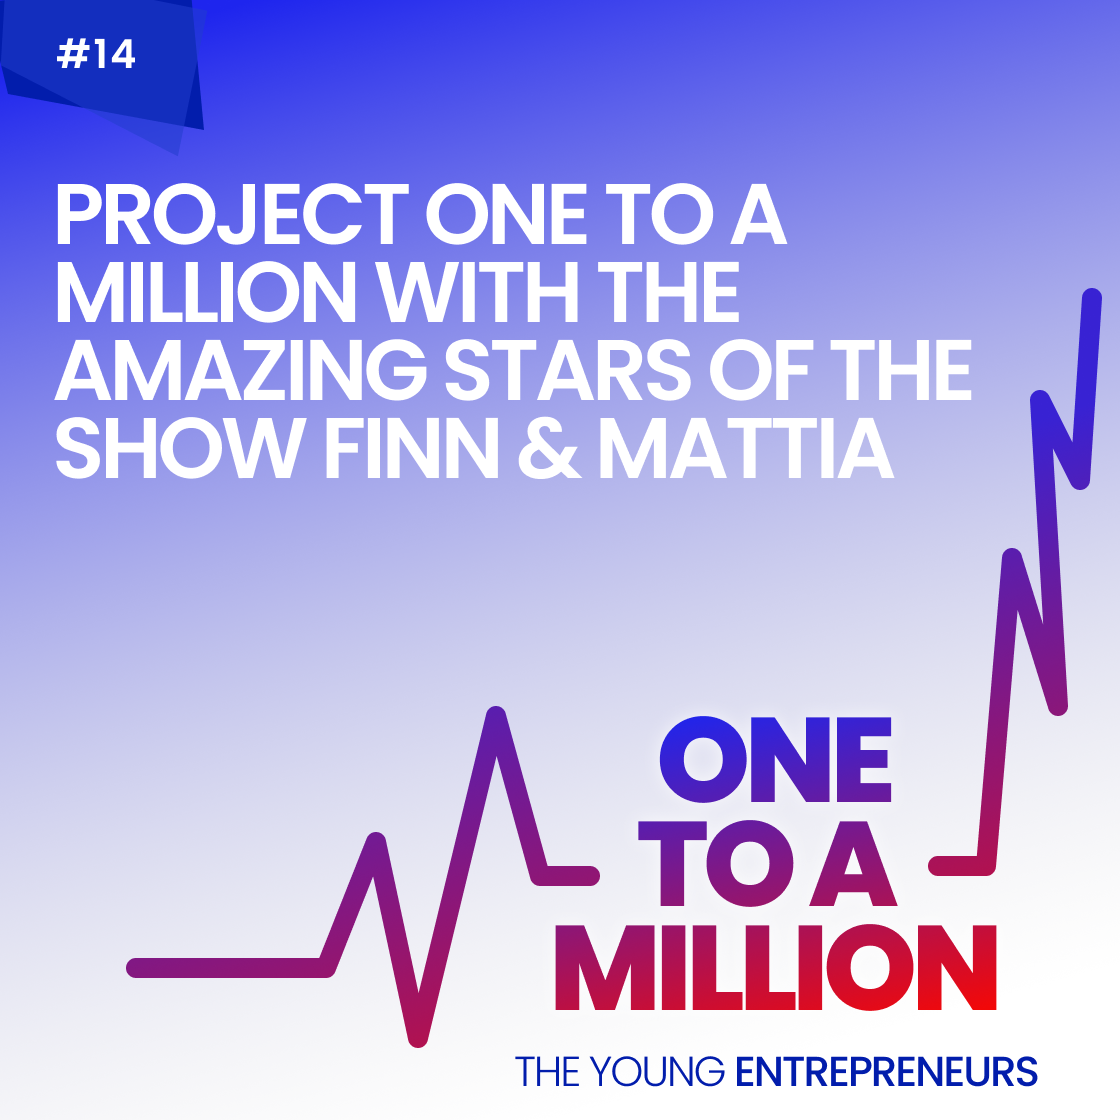 Project One To A Million With Amazing Stars Of The Show Finn & Mattia